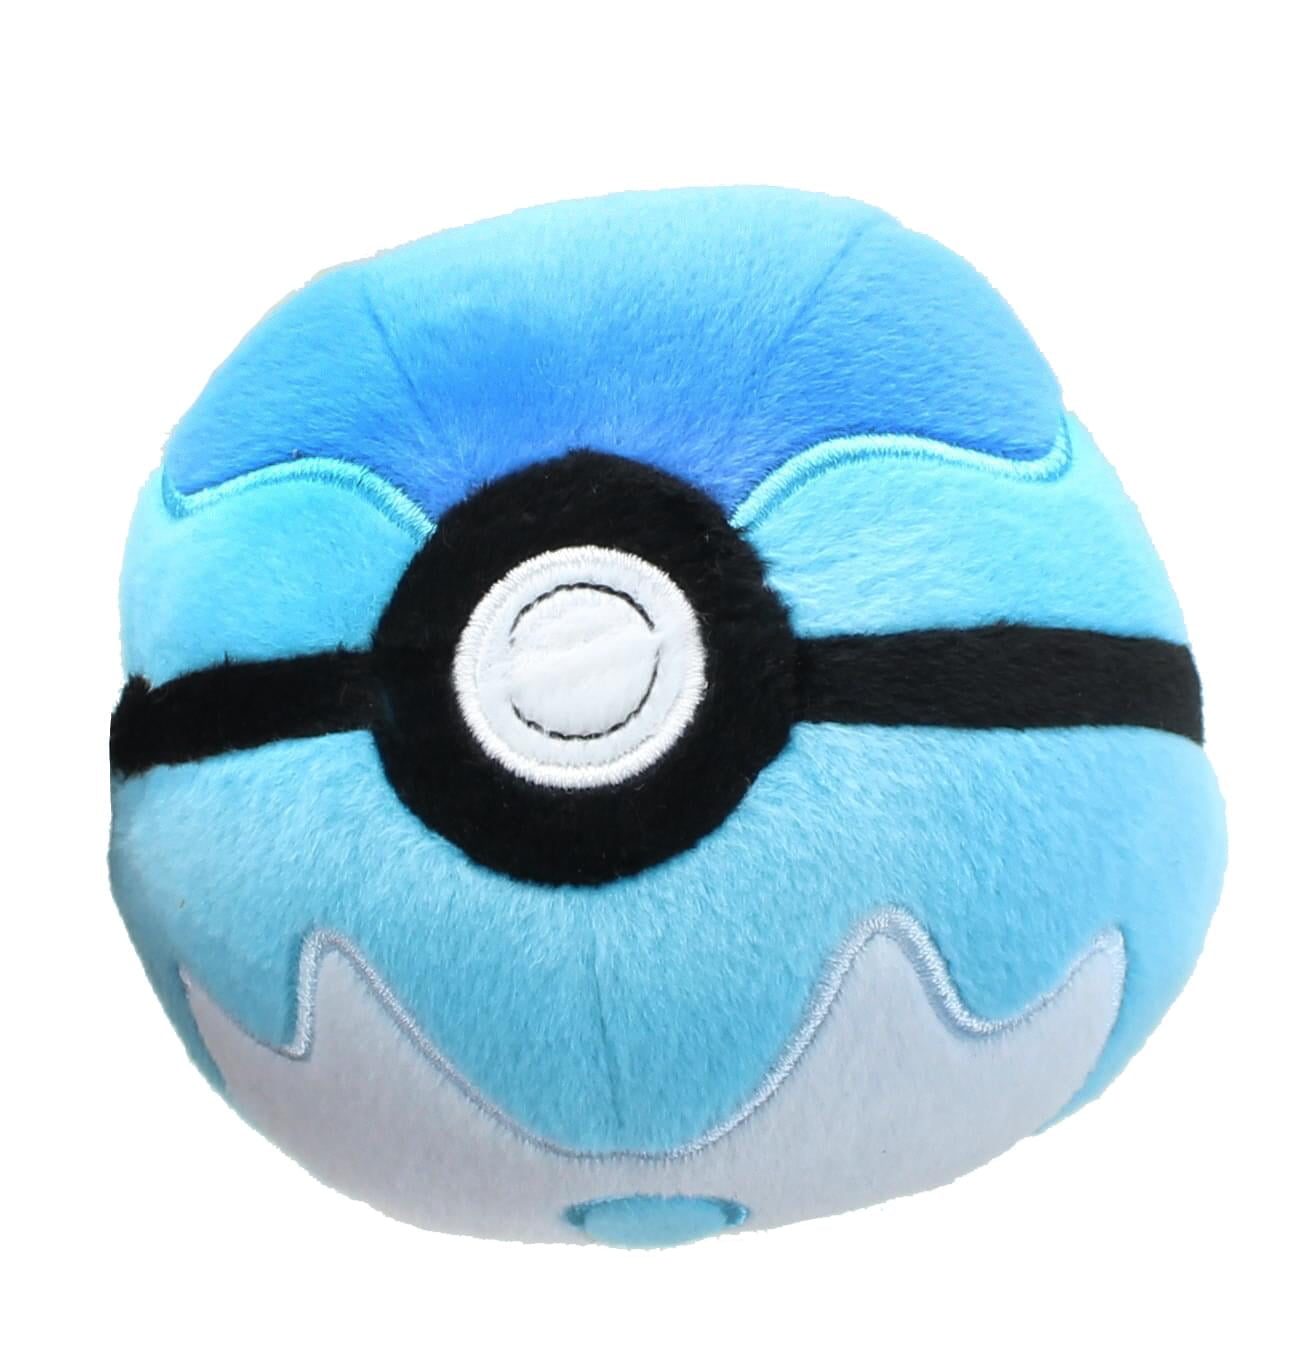 1pc Pokemon 2.5" Quick Ball Blue and Yellow with Minifigure Pop Open USA Shipper 